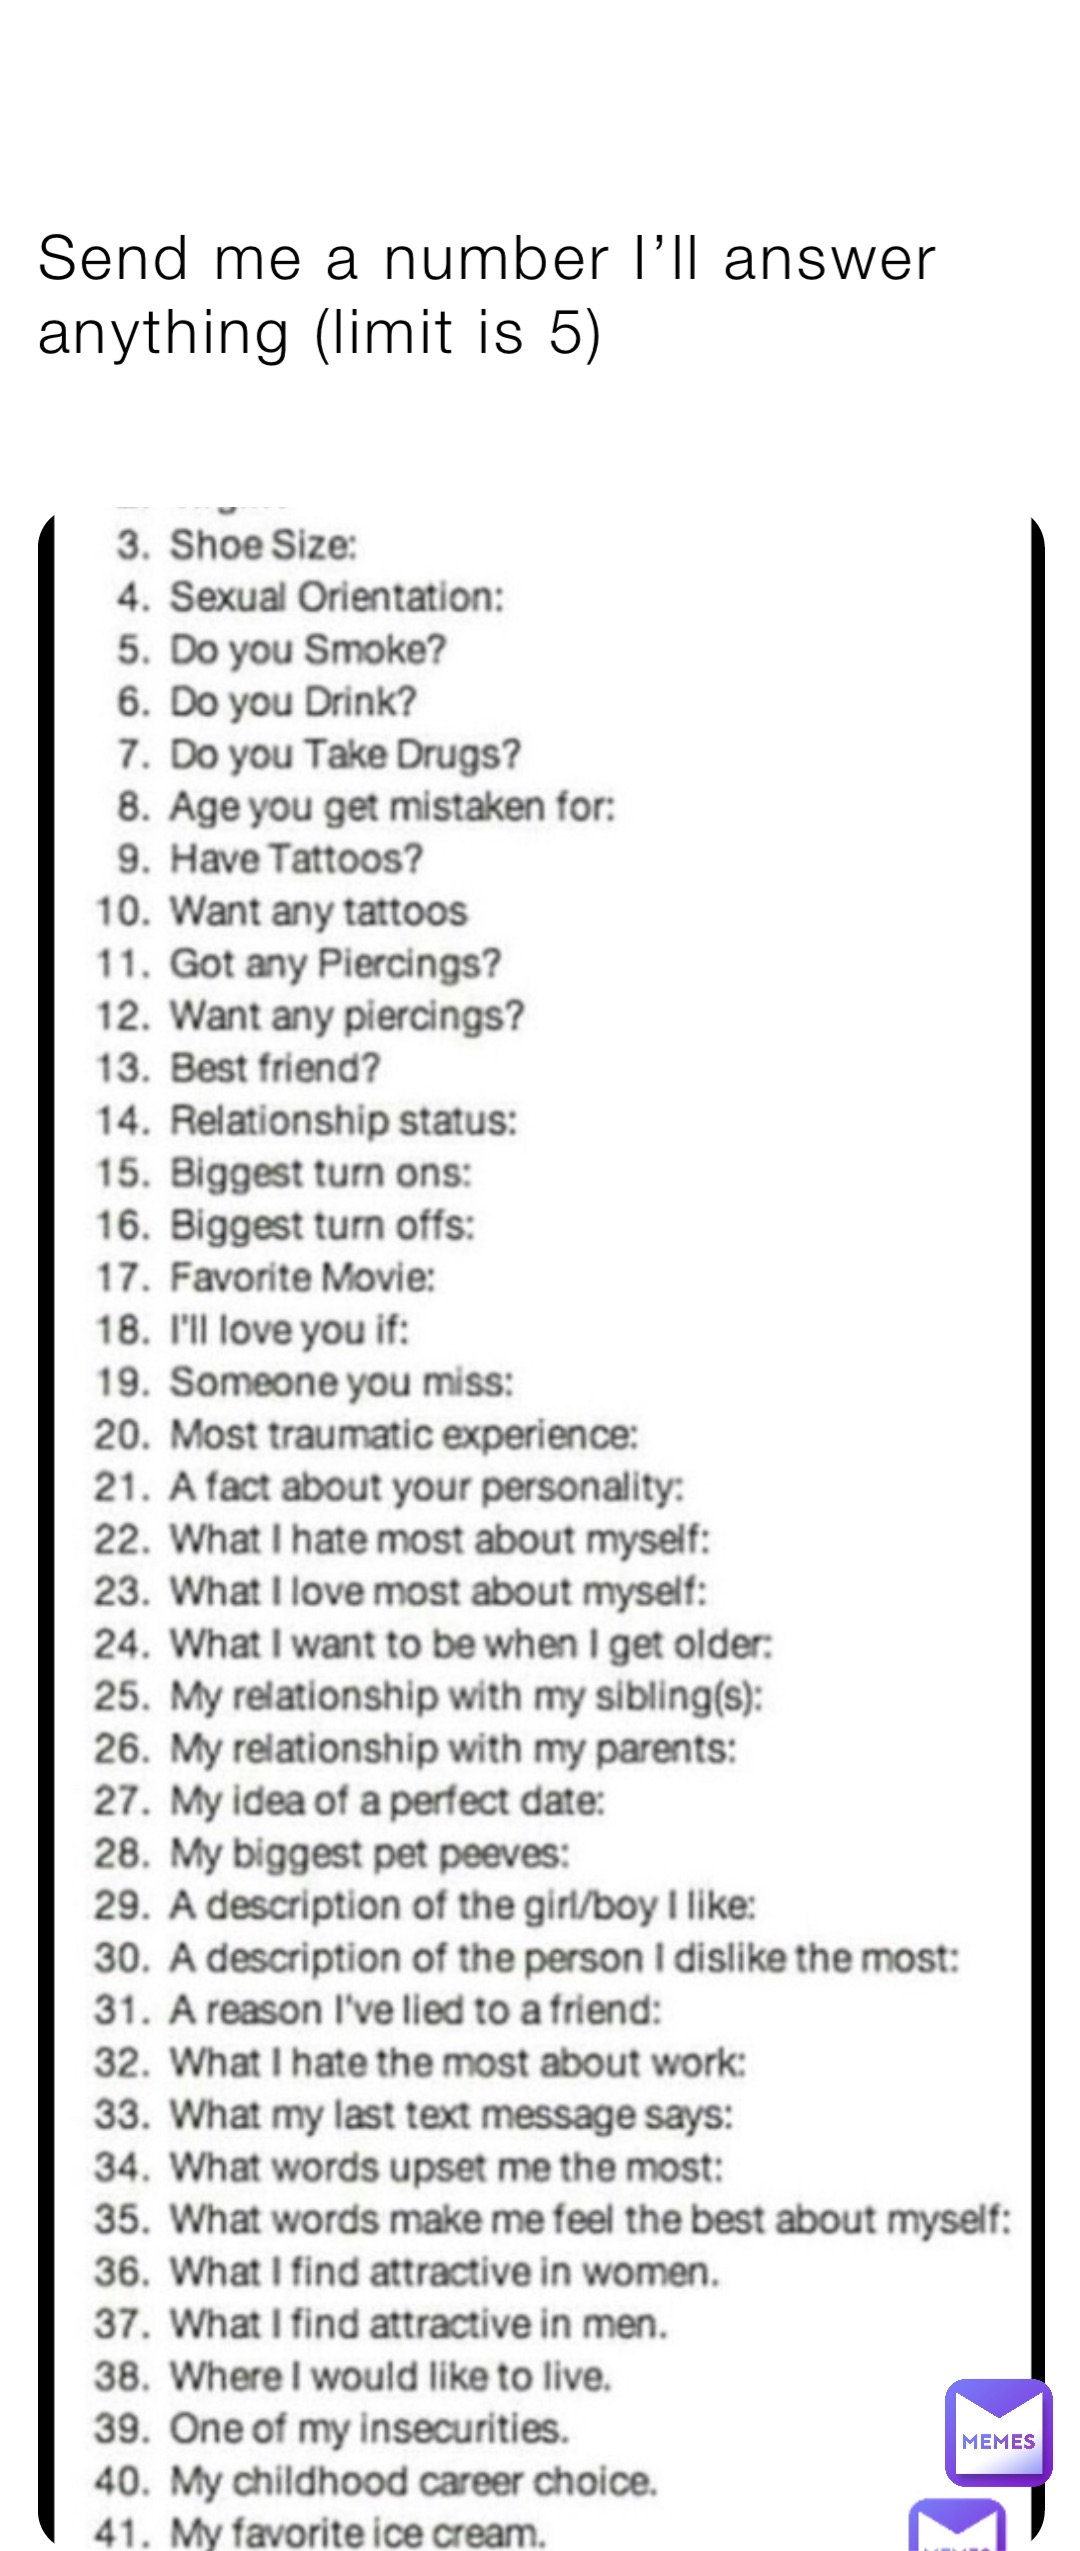 Send me a number I’ll answer anything (limit is 5)